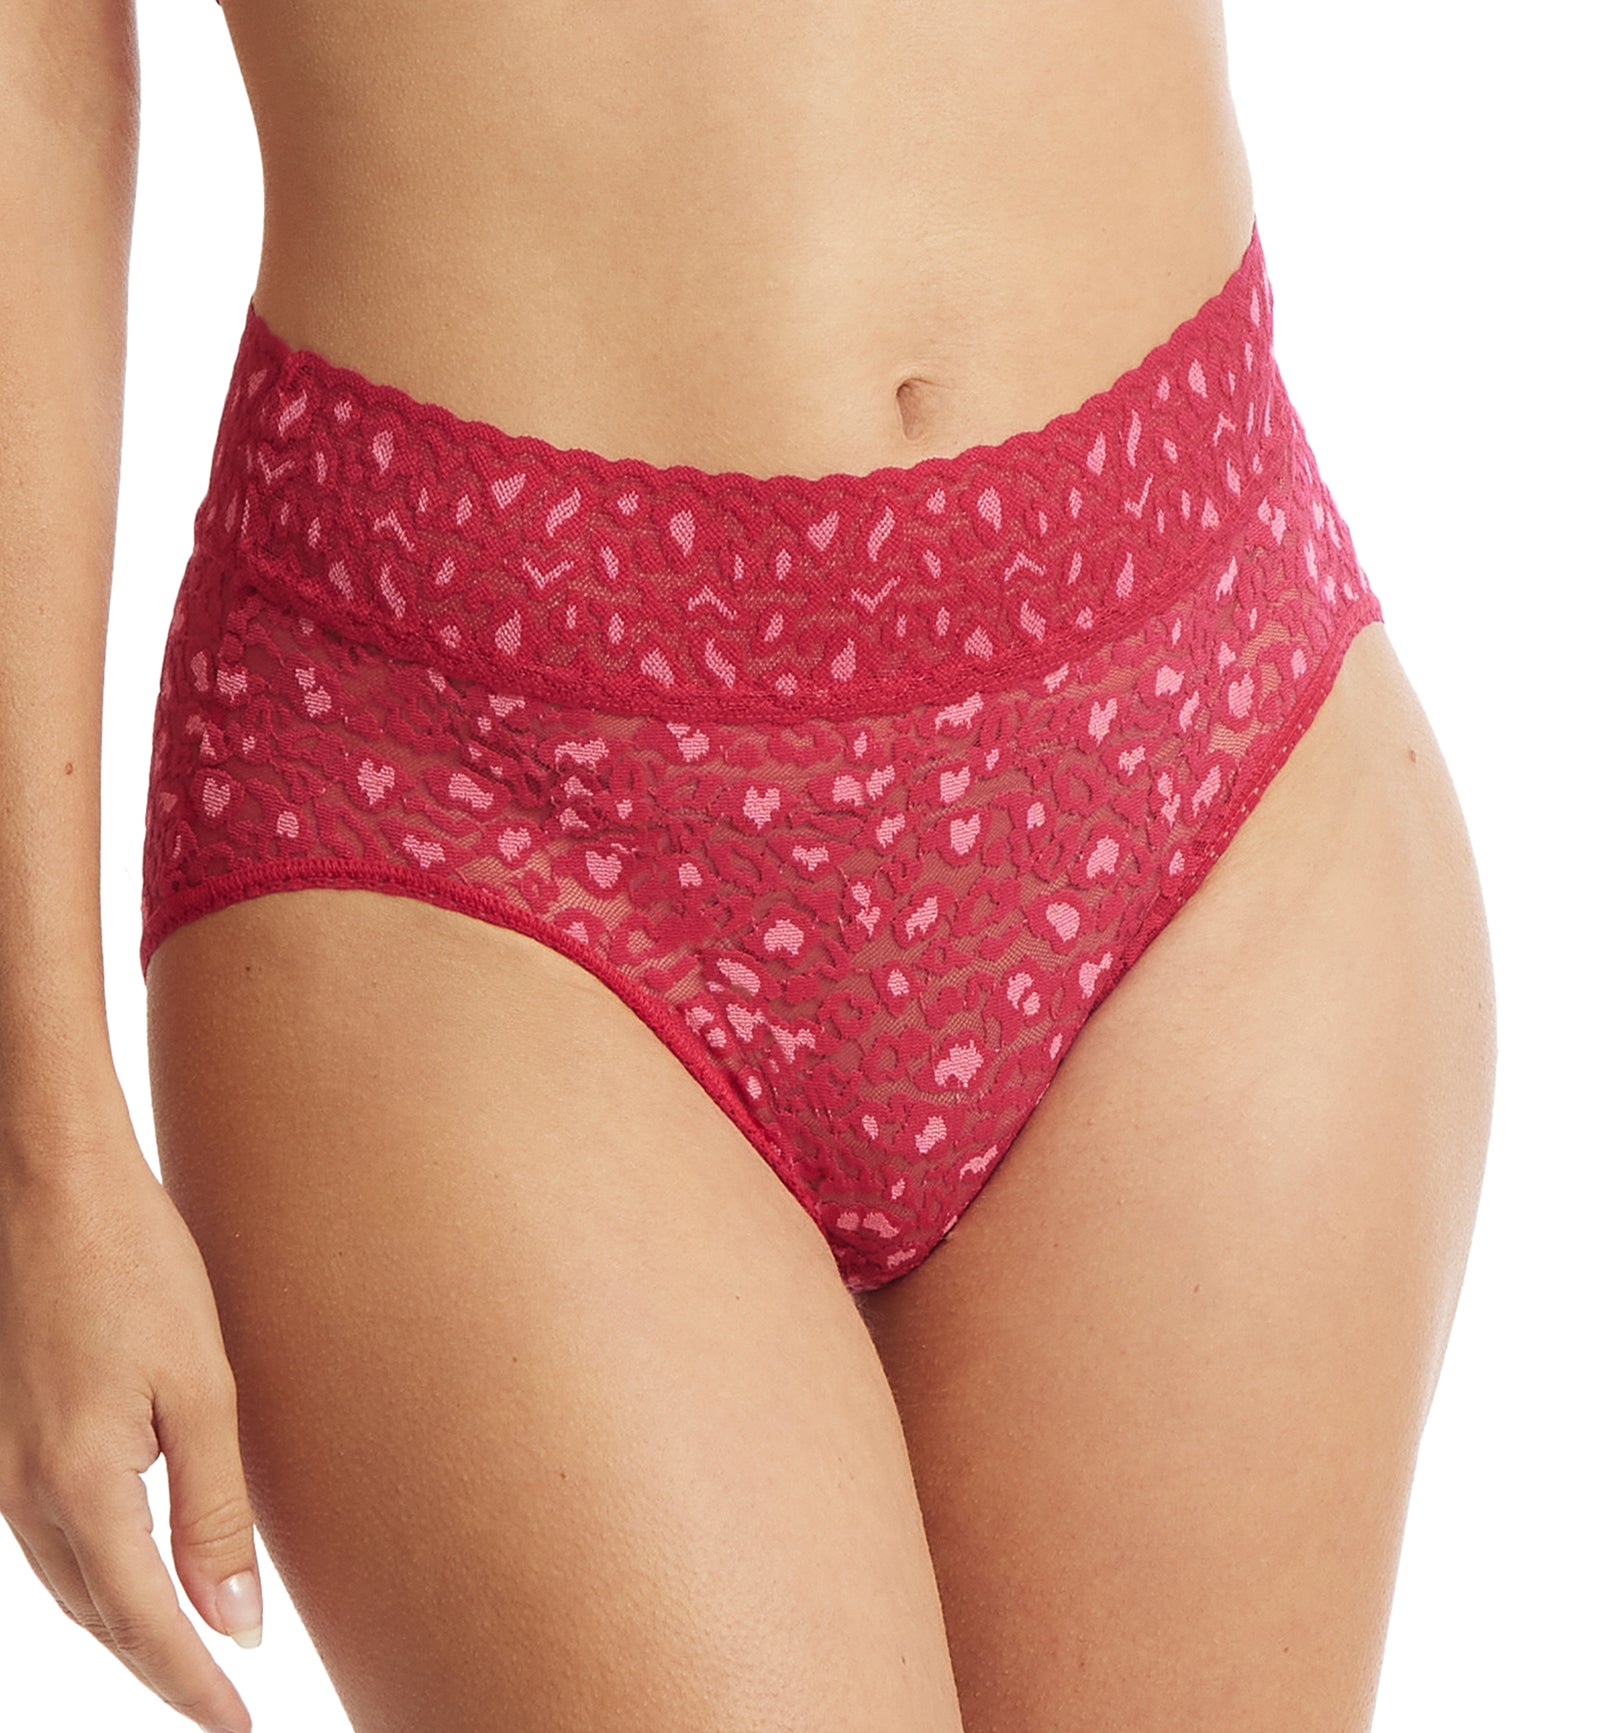 Hanky Panky Cross Dyed Leopard French Brief (7J2461),XS,Berry Sangria/Pink - Berry Sangria/Pink,XS